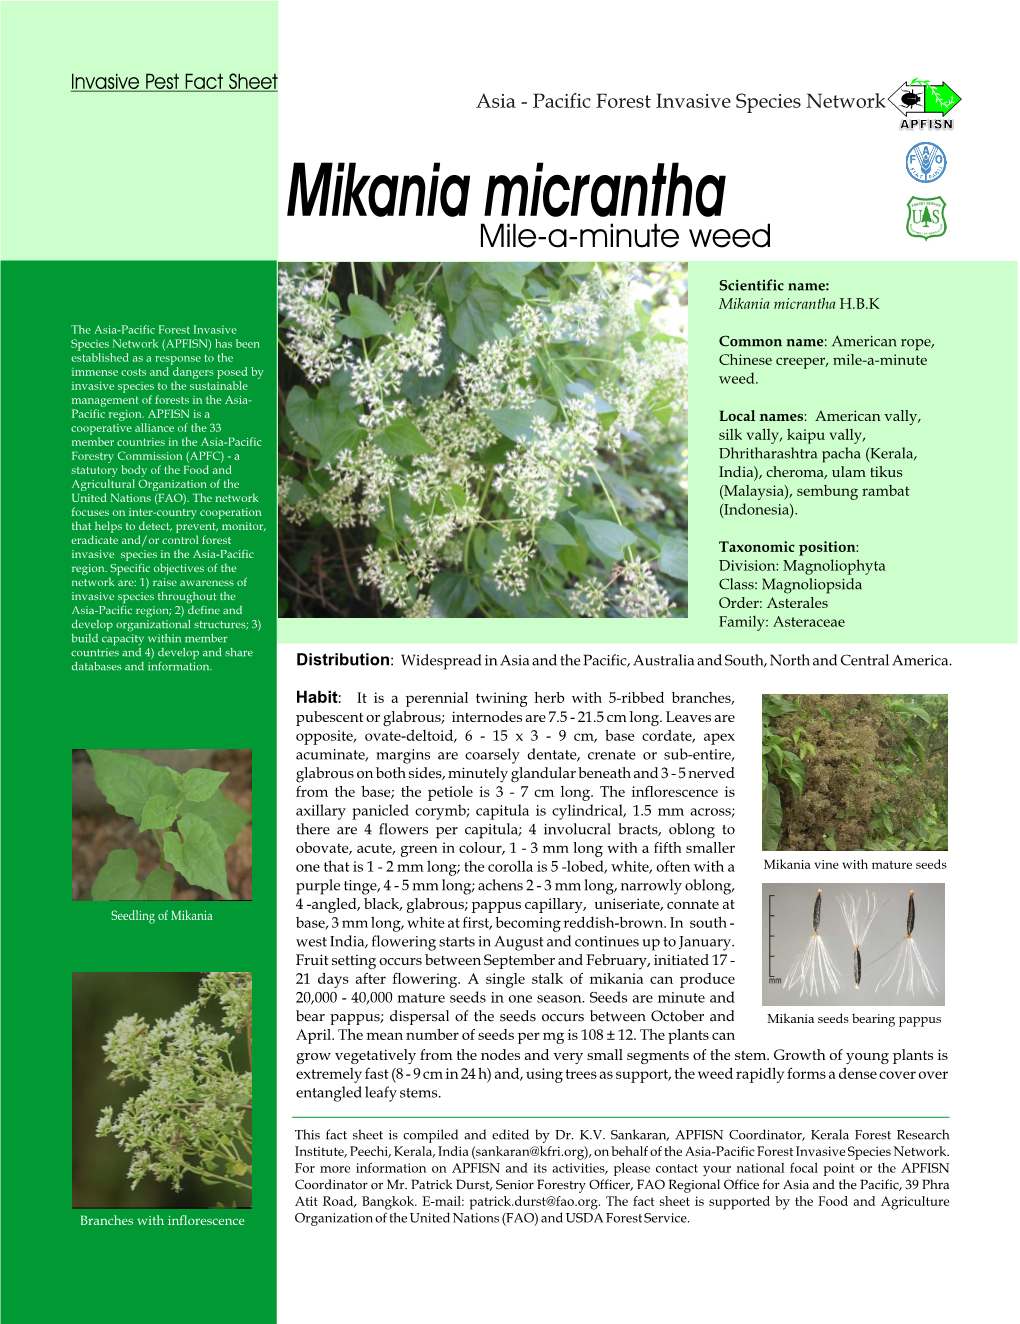 Mikania Micrantha Mile-A-Minute Weed